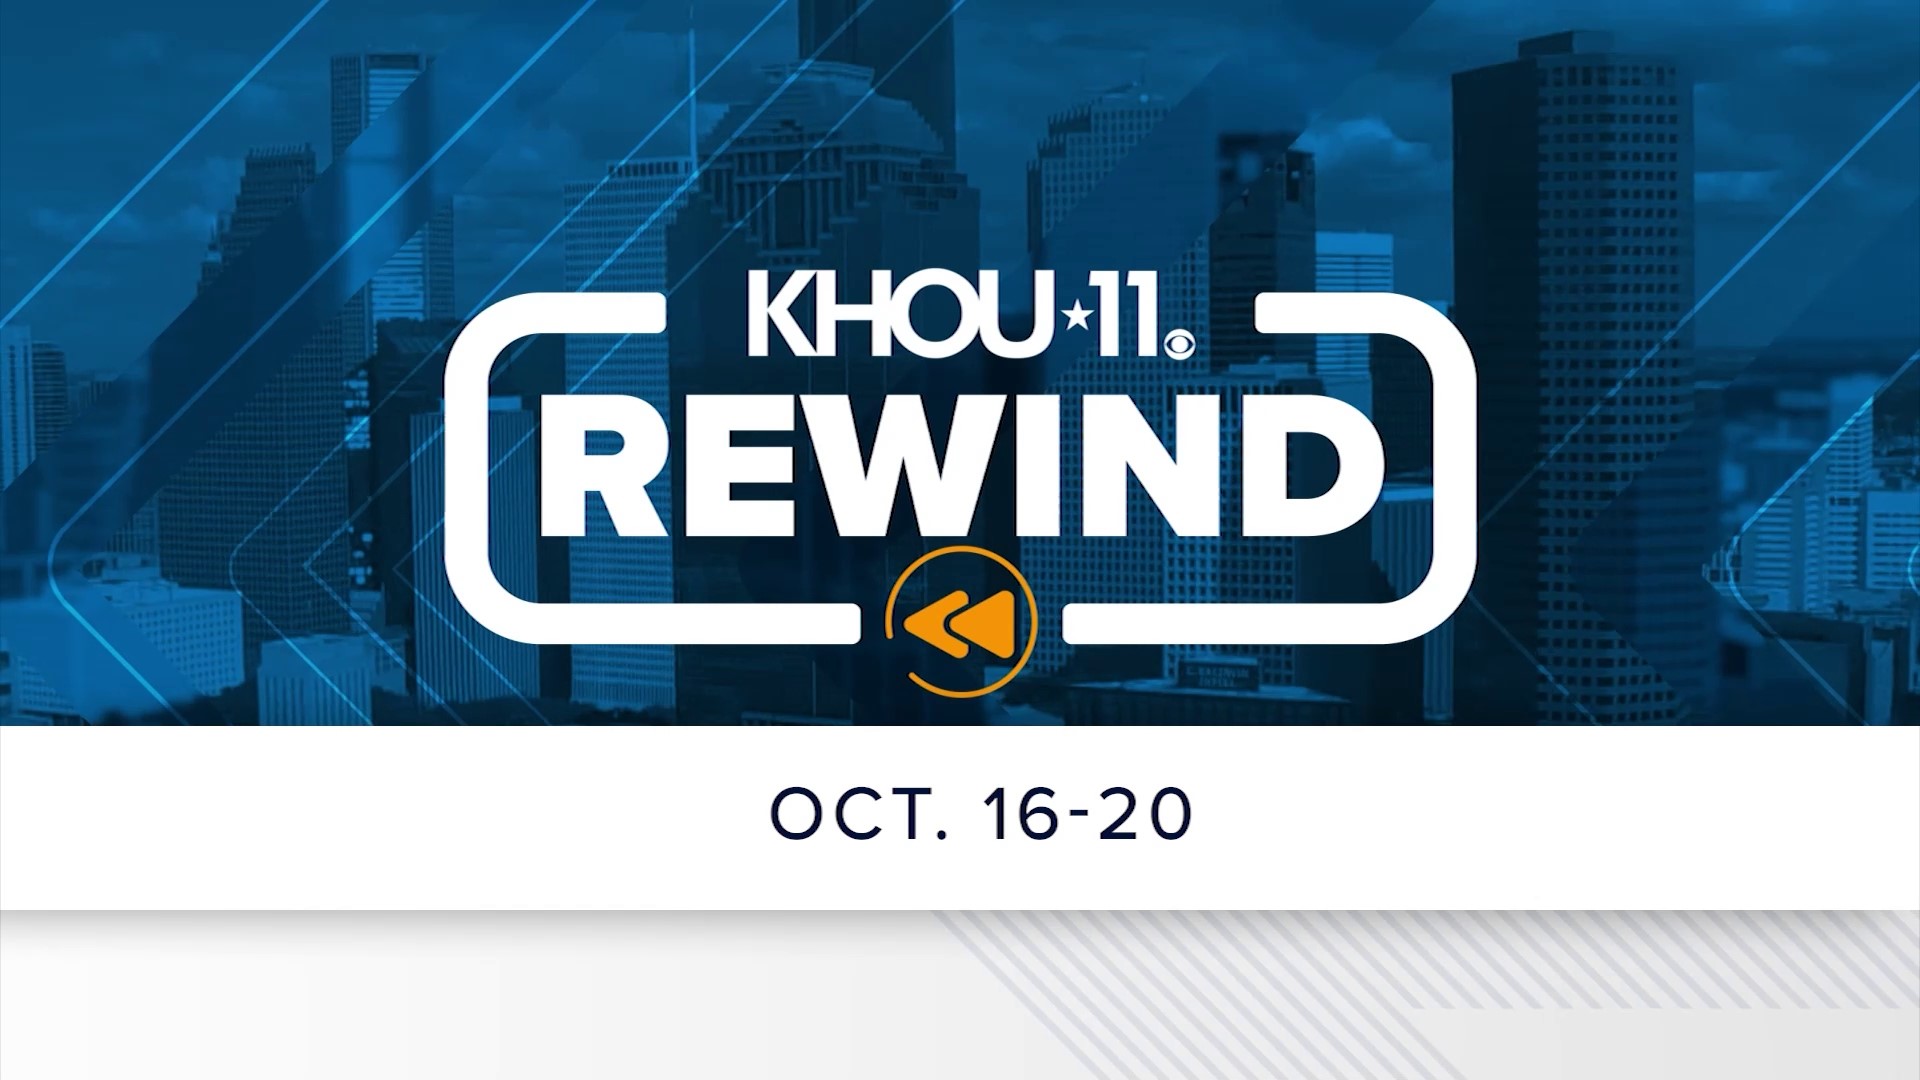 In every episode of the KHOU 11 Rewind, we get you caught up on stories you may have missed this week so you're ready for next week.